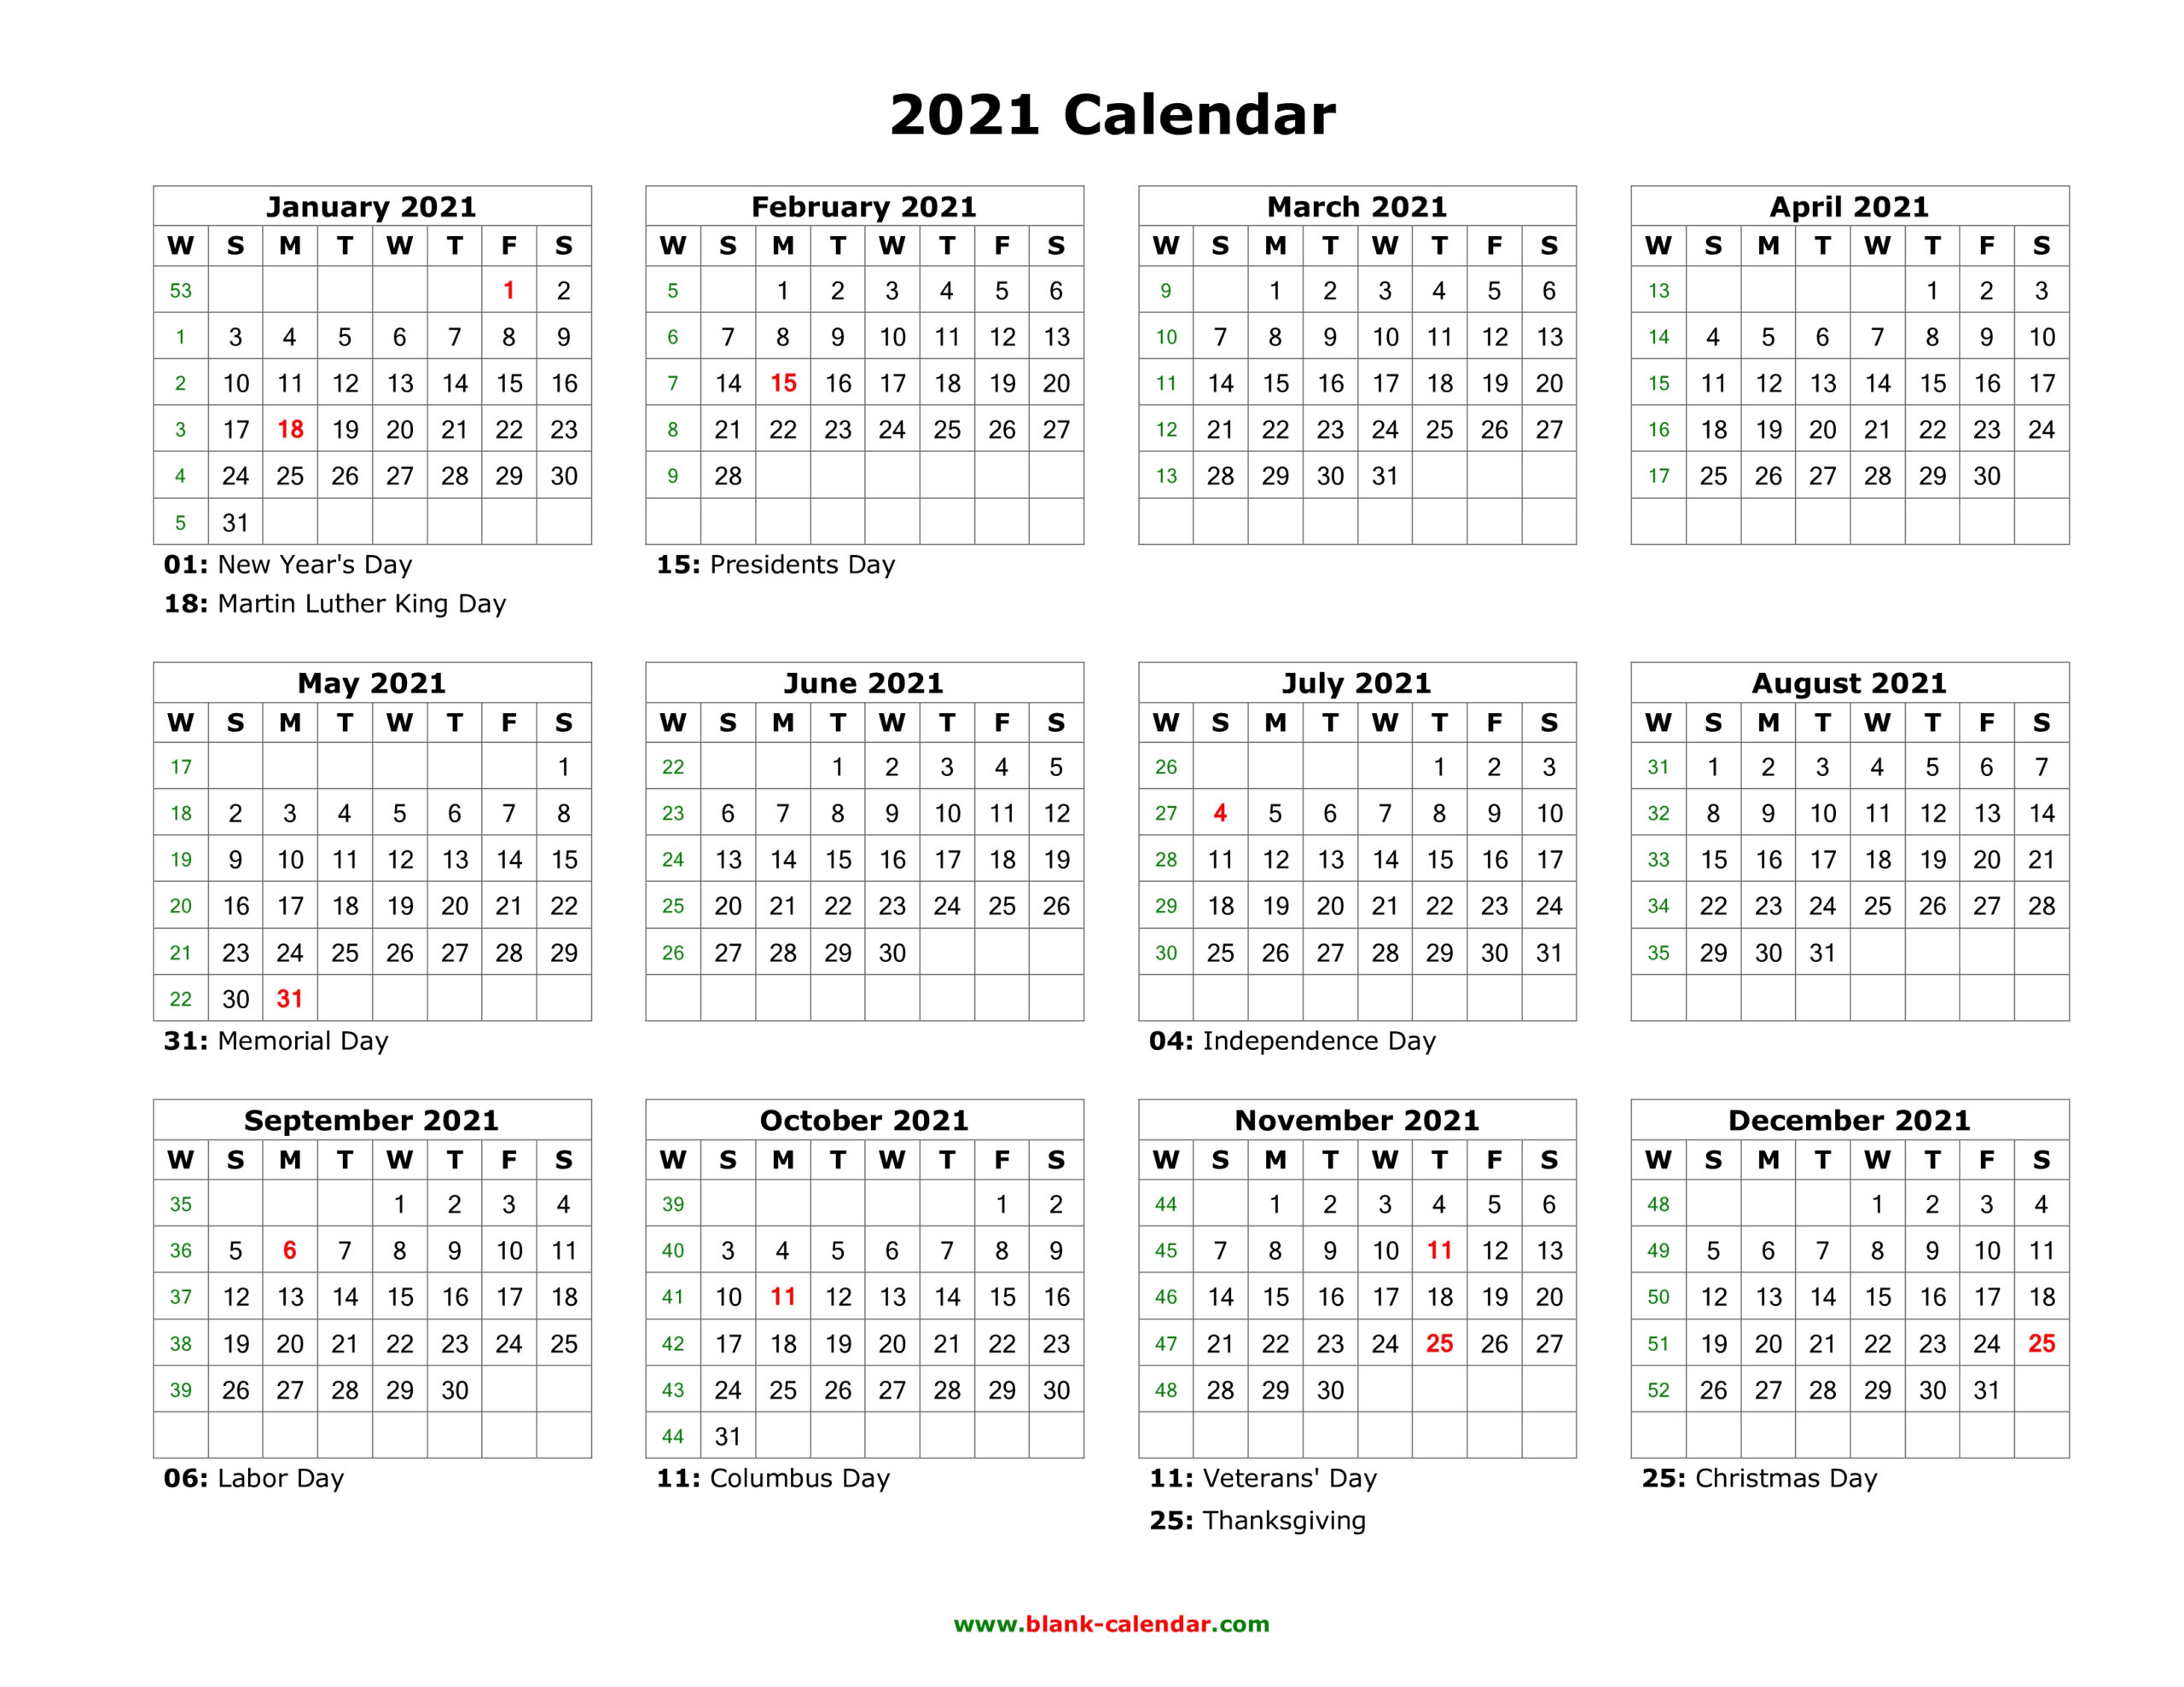 Download Blank Calendar 2021 With Us Holidays (12 Months On